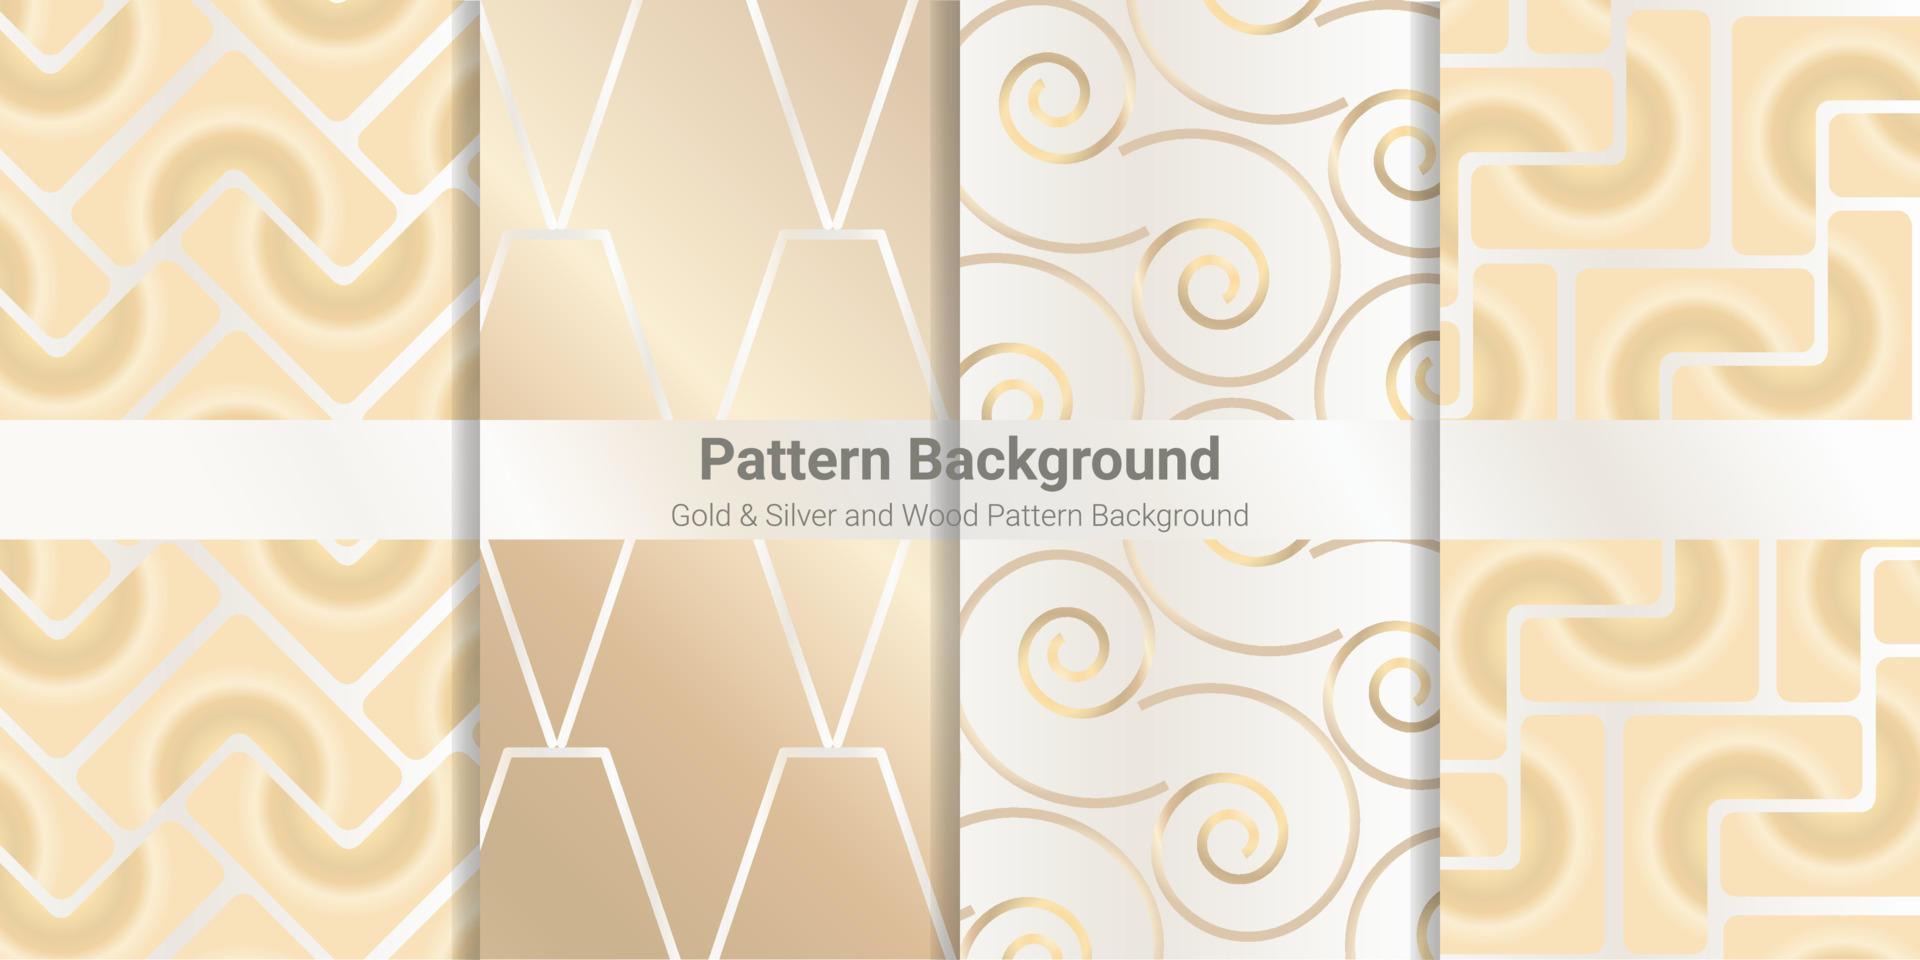 pattern background gold, silver gold and wood pattern background vector